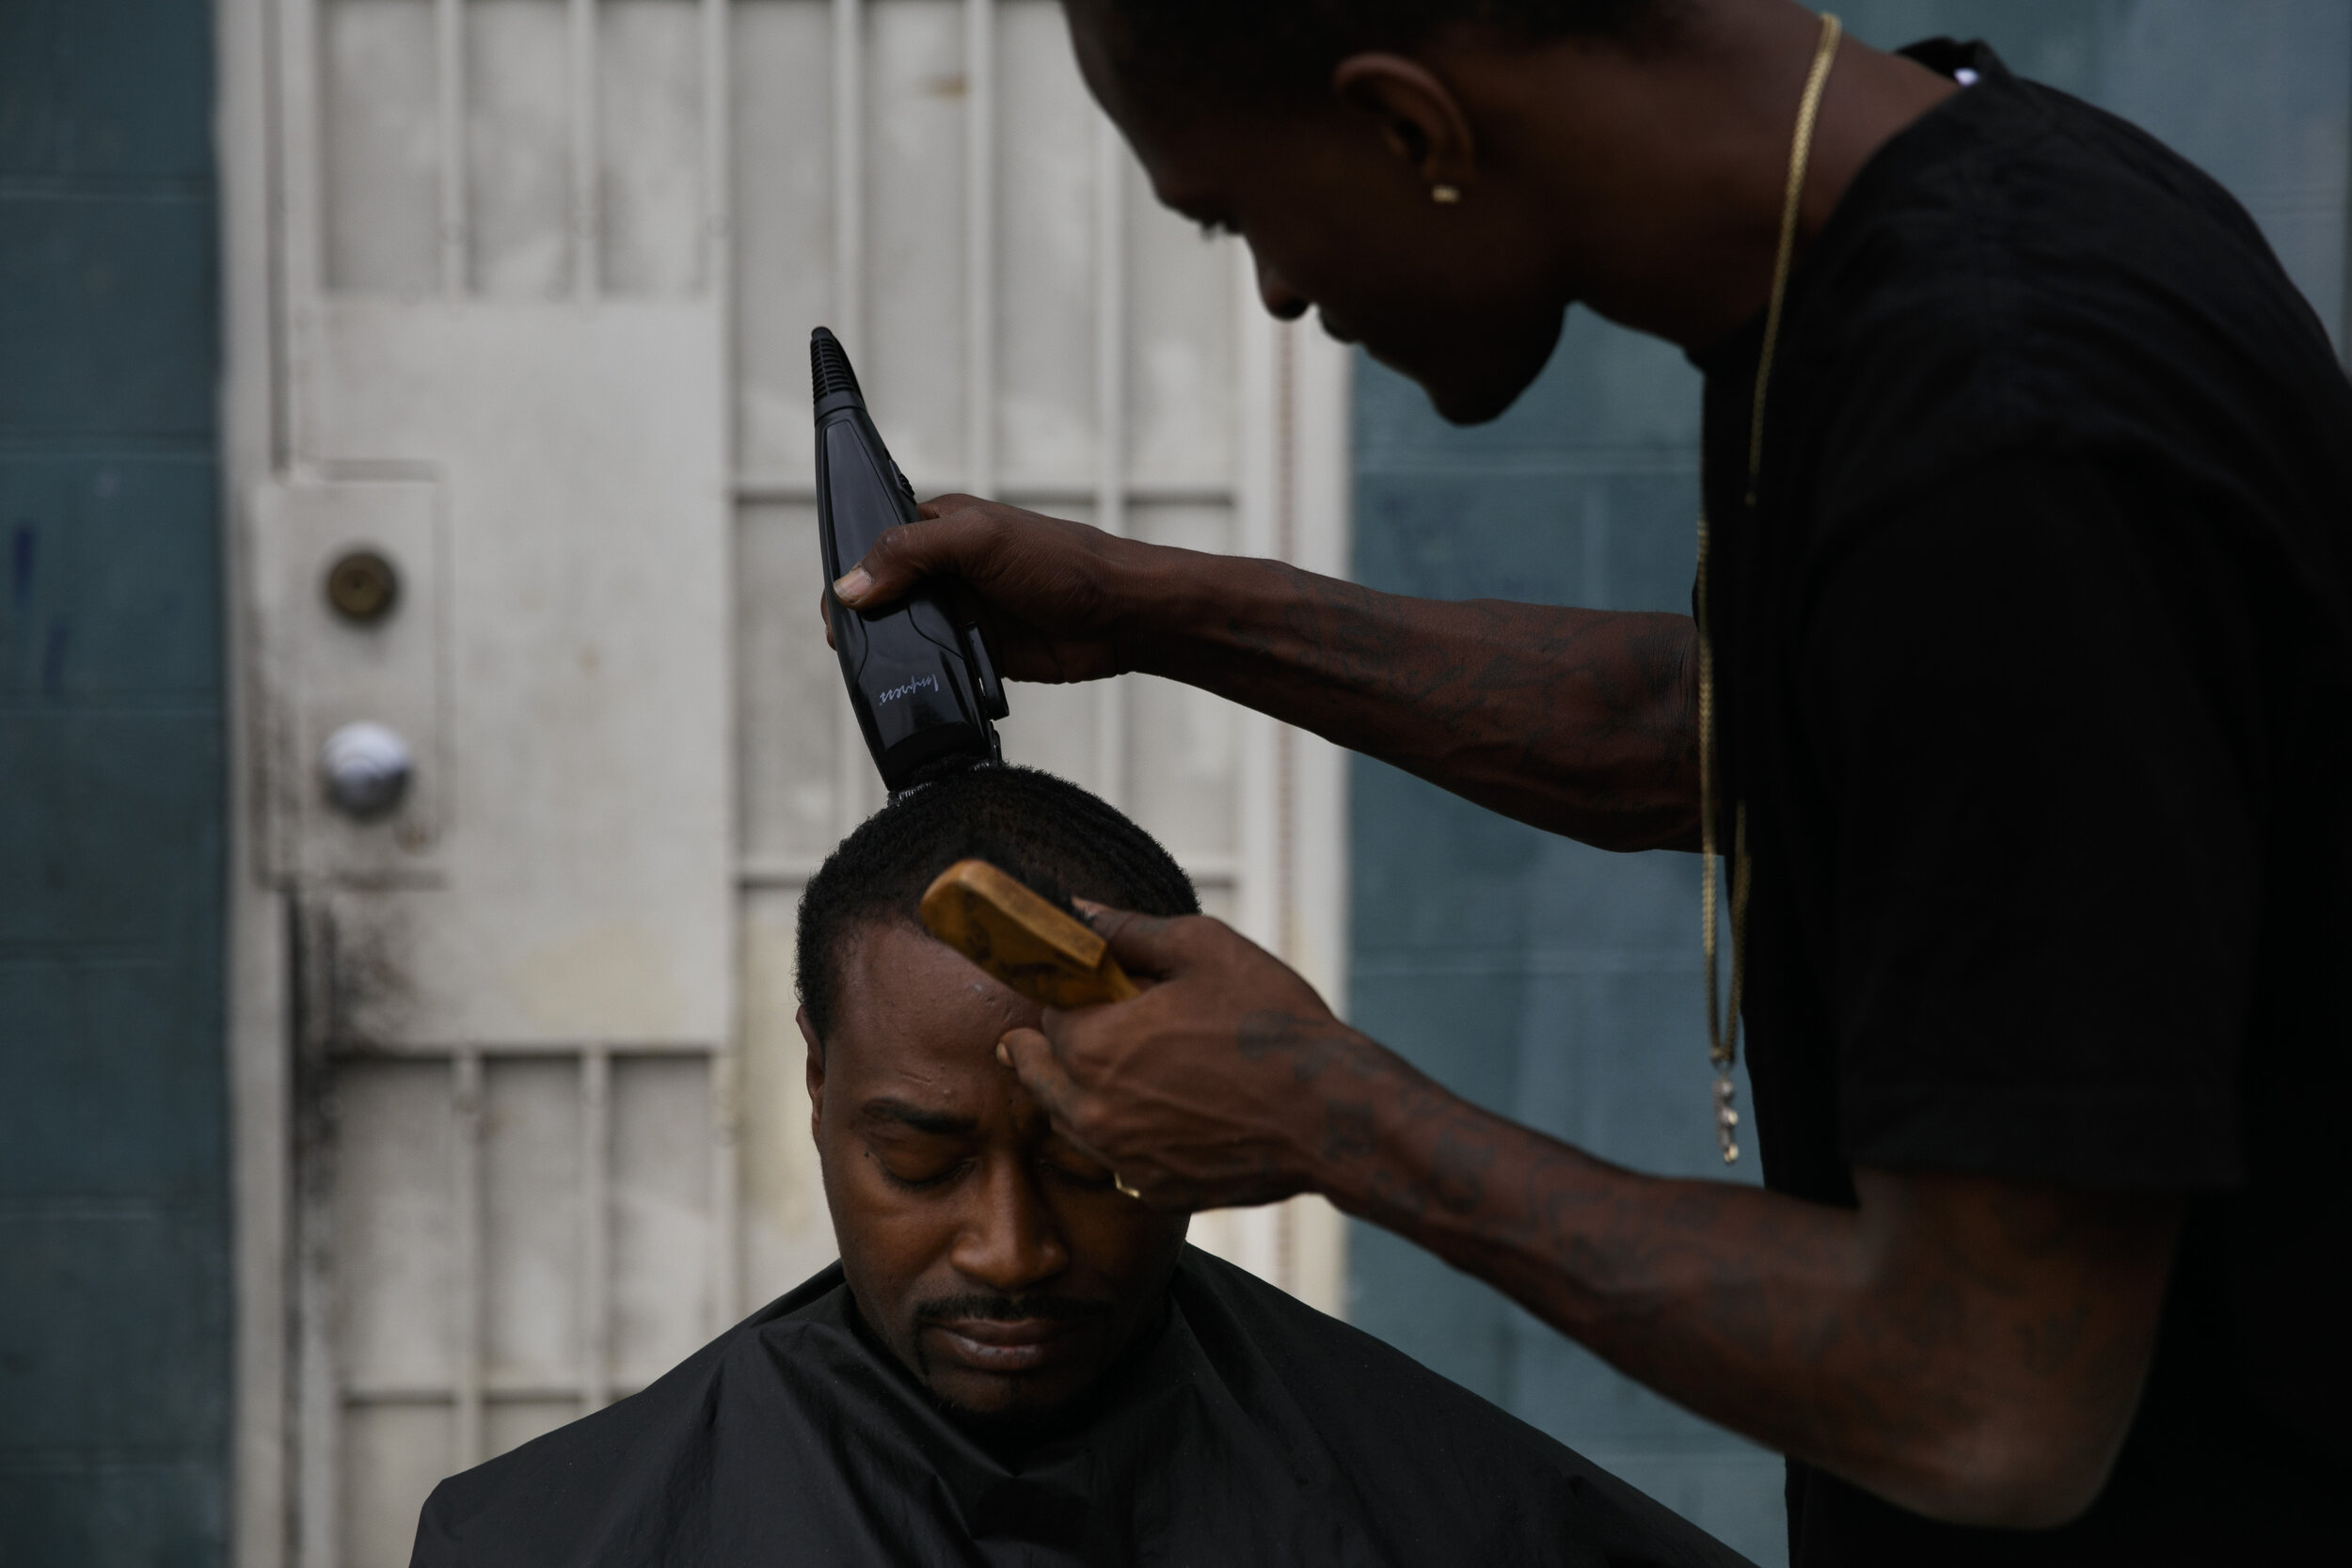  Eric Frierson, 37, gets an haircut from Kenneth Cox, 32, outside an apartment building at the Imperial Courts housing project in the Watts neighborhood of Los Angeles, Wednesday, June 17, 2020. Frierson laments losing focus on becoming a good athlet